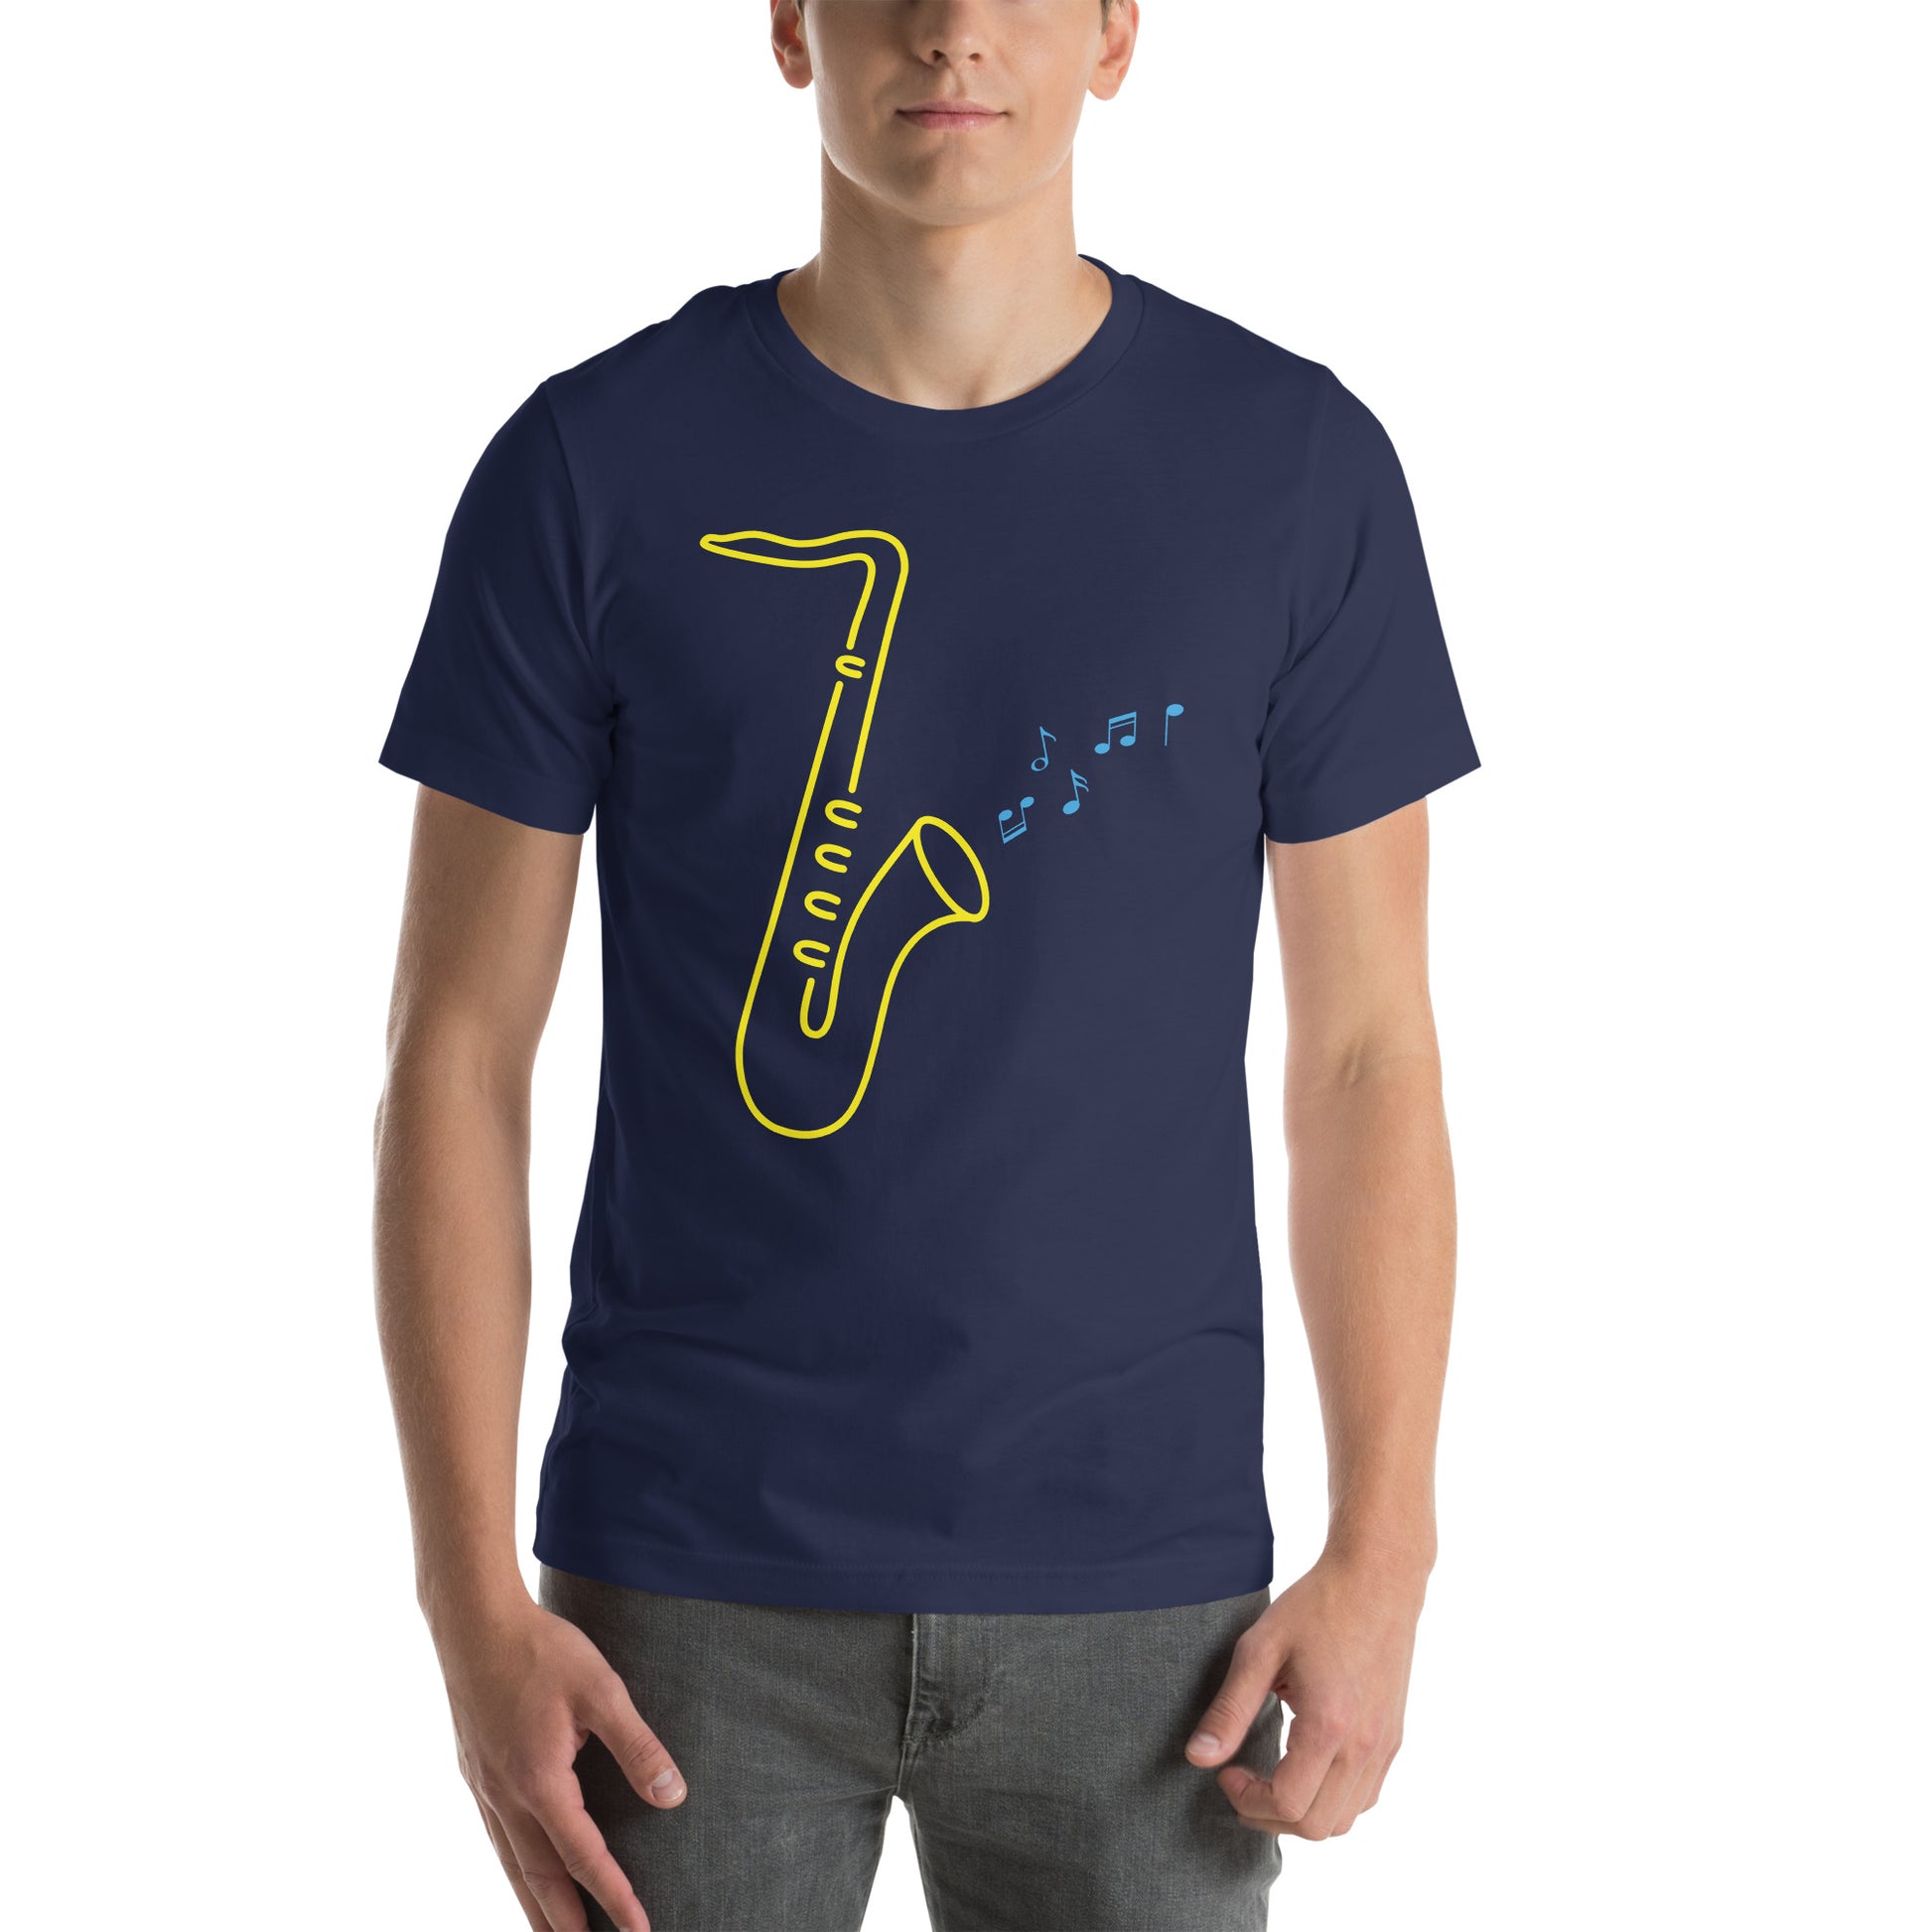 Navy blue T-Shirt with a vibrant design of a yellow saxophone and blue musical notes, from the TEQNEON Music Box collection. Titled 'GOLDEN SAXOPHONE'